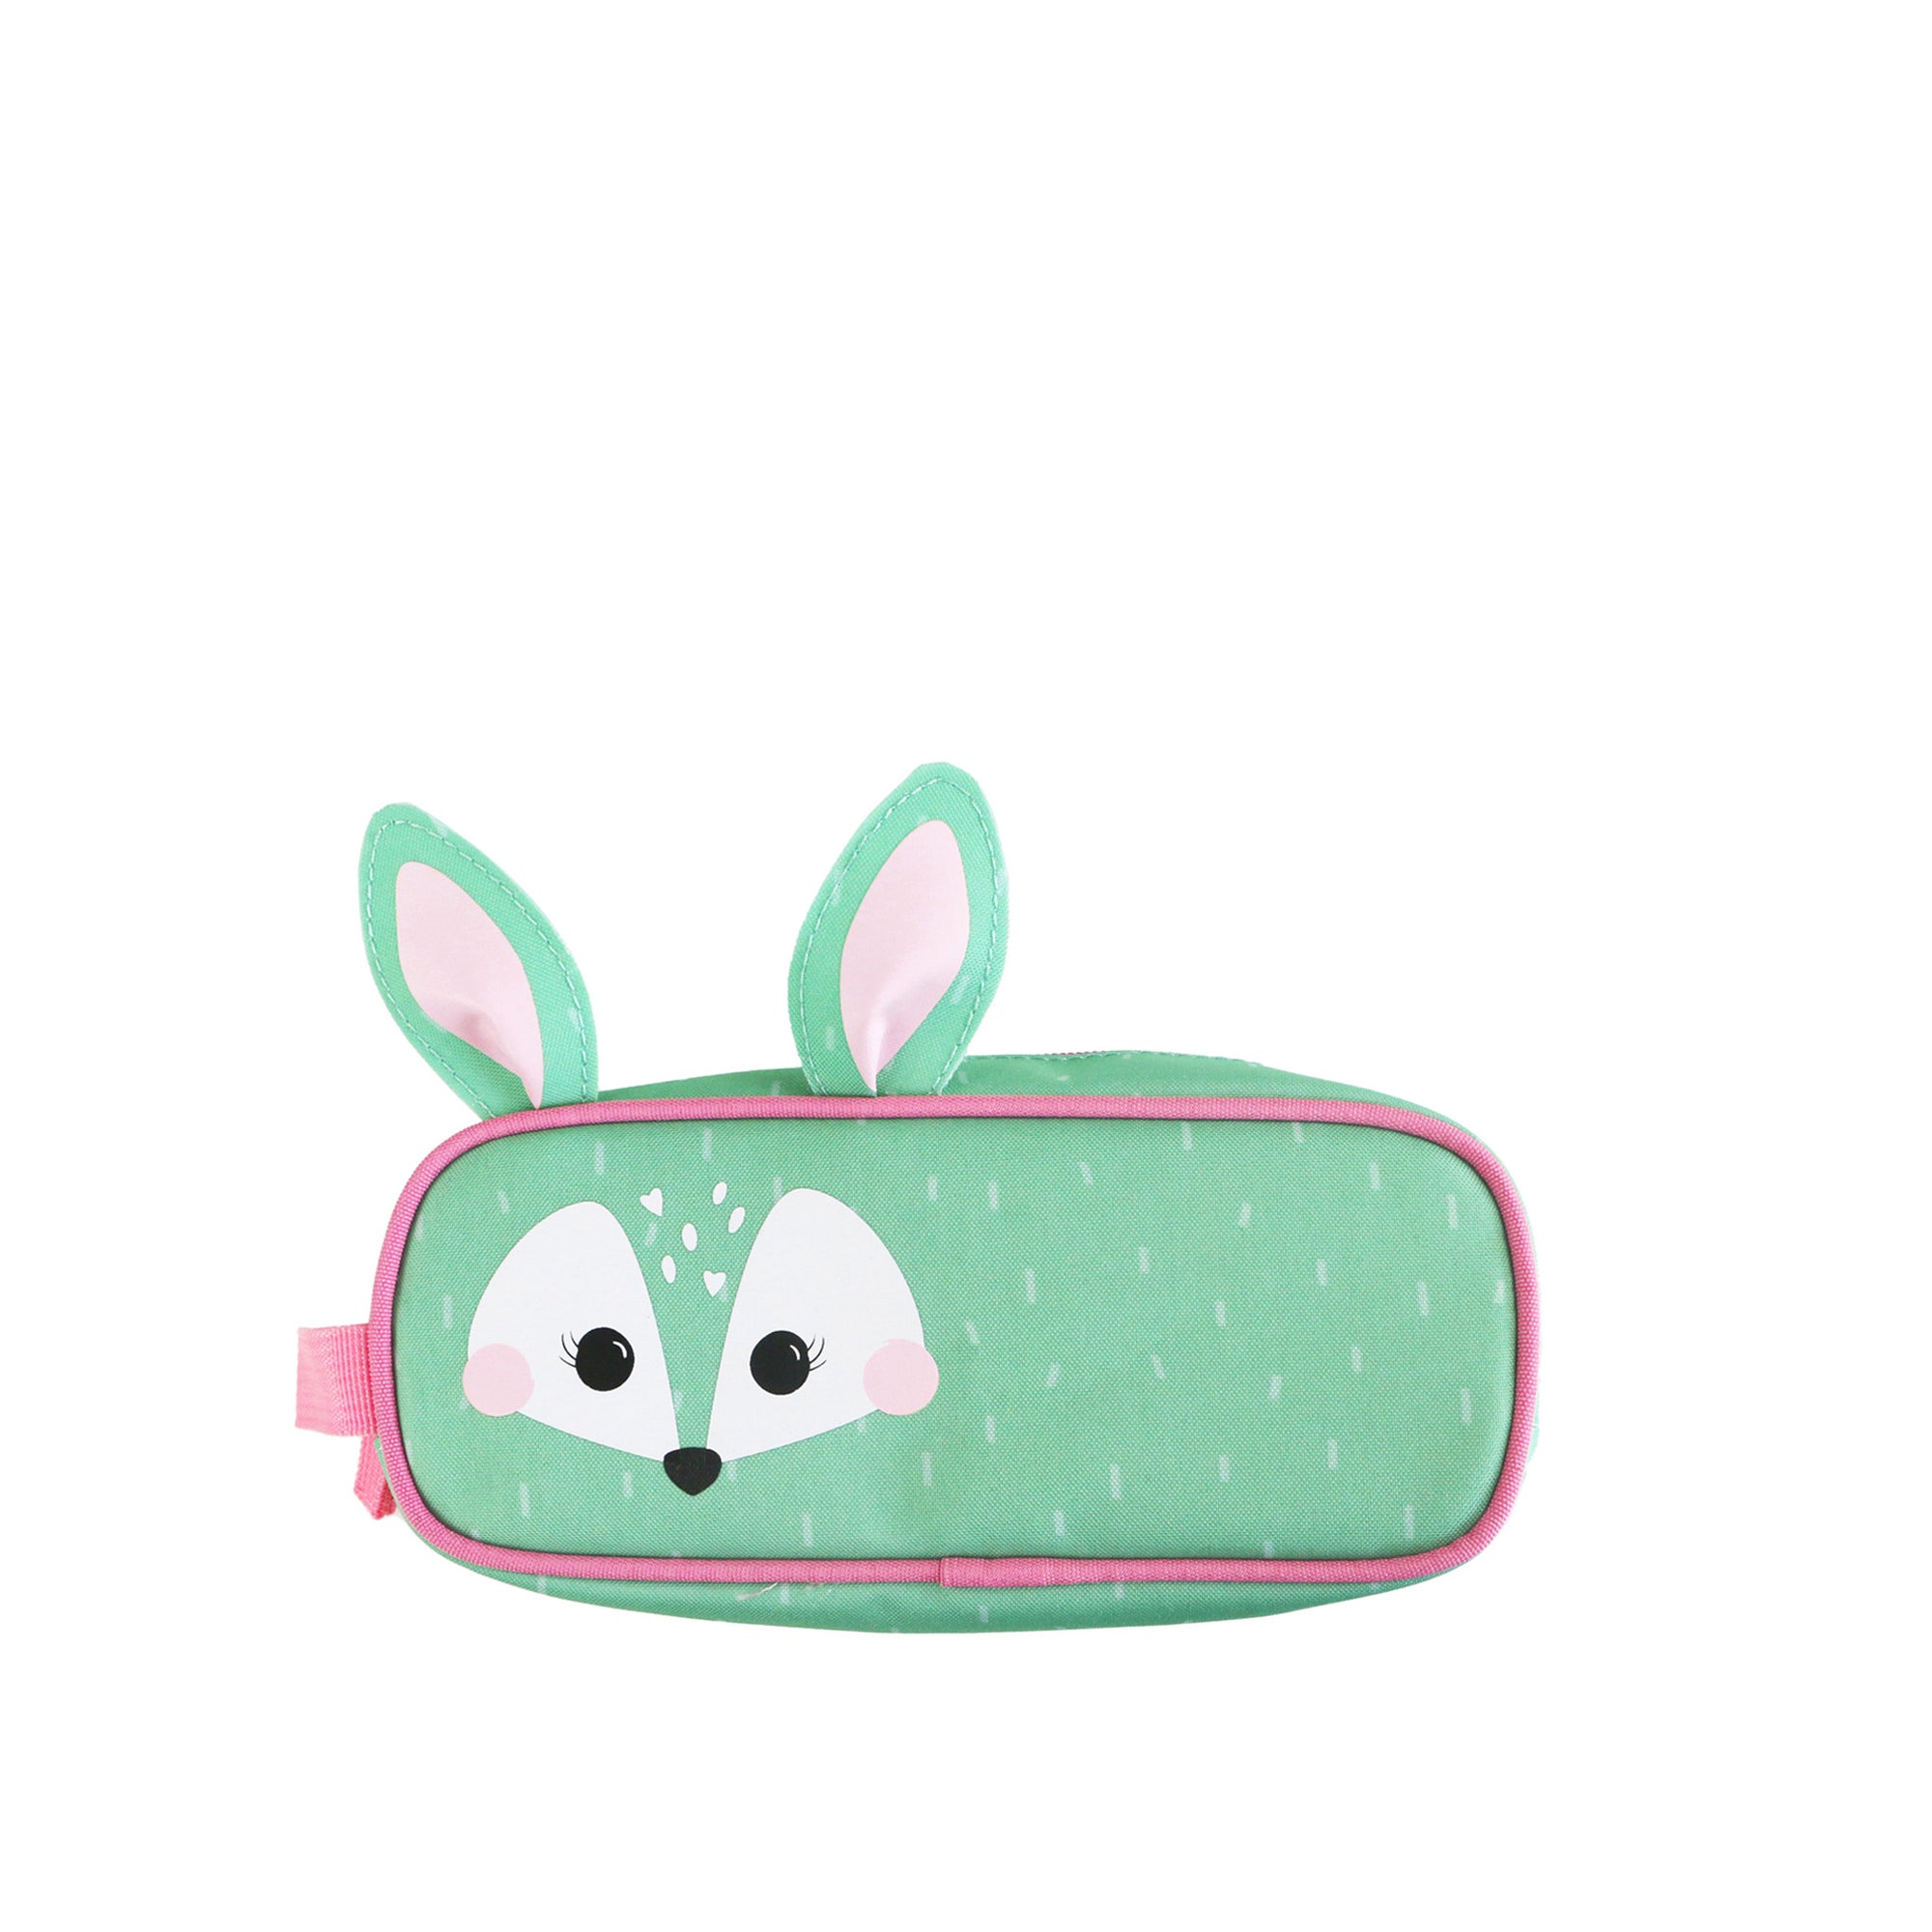 Kids Printed Pencil Case Pouch - Fiona the Fawn